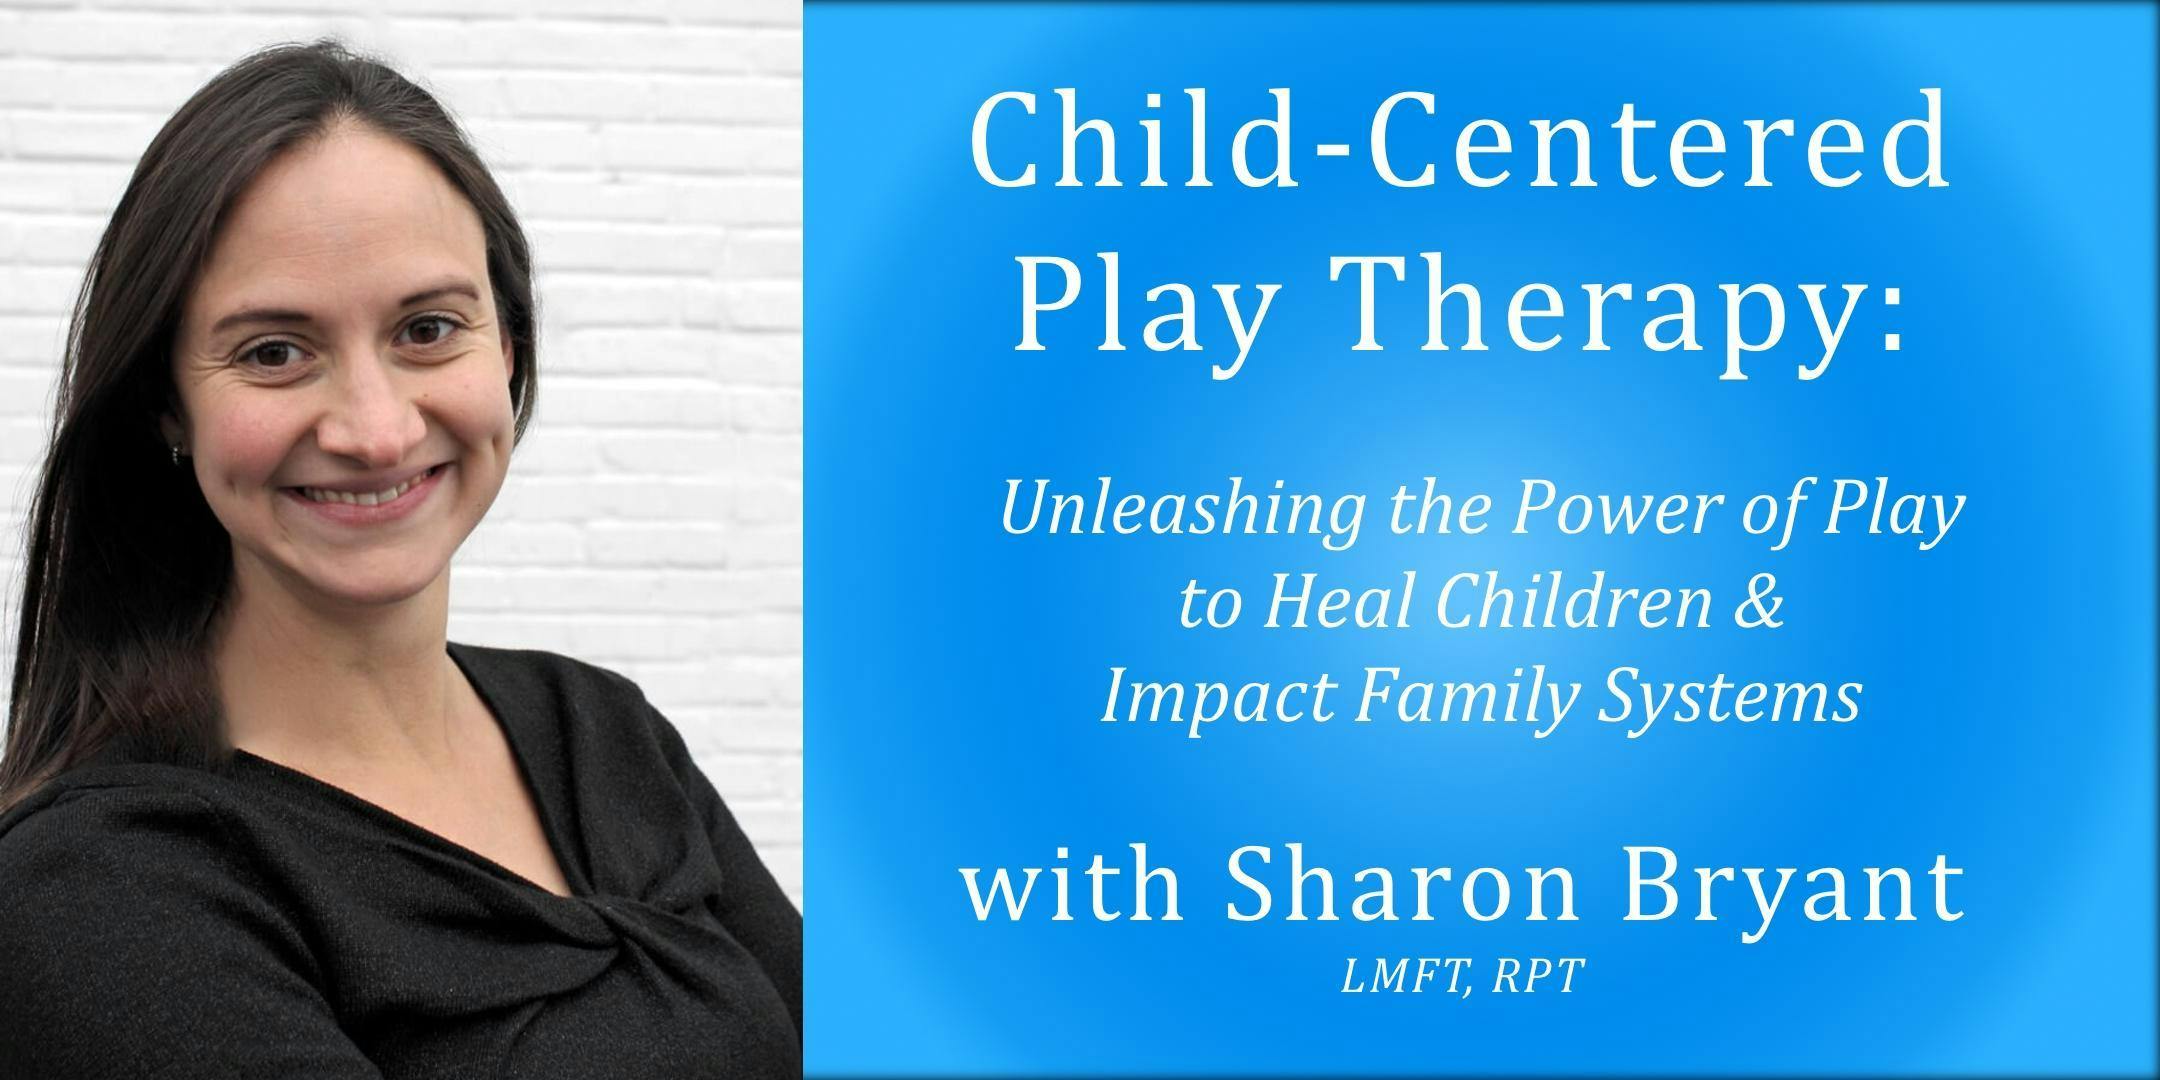 Child-Centered Play Therapy: Unleashing the Power of Play to Heal Children and Impact Family Systems(2-day, 13 CEs)